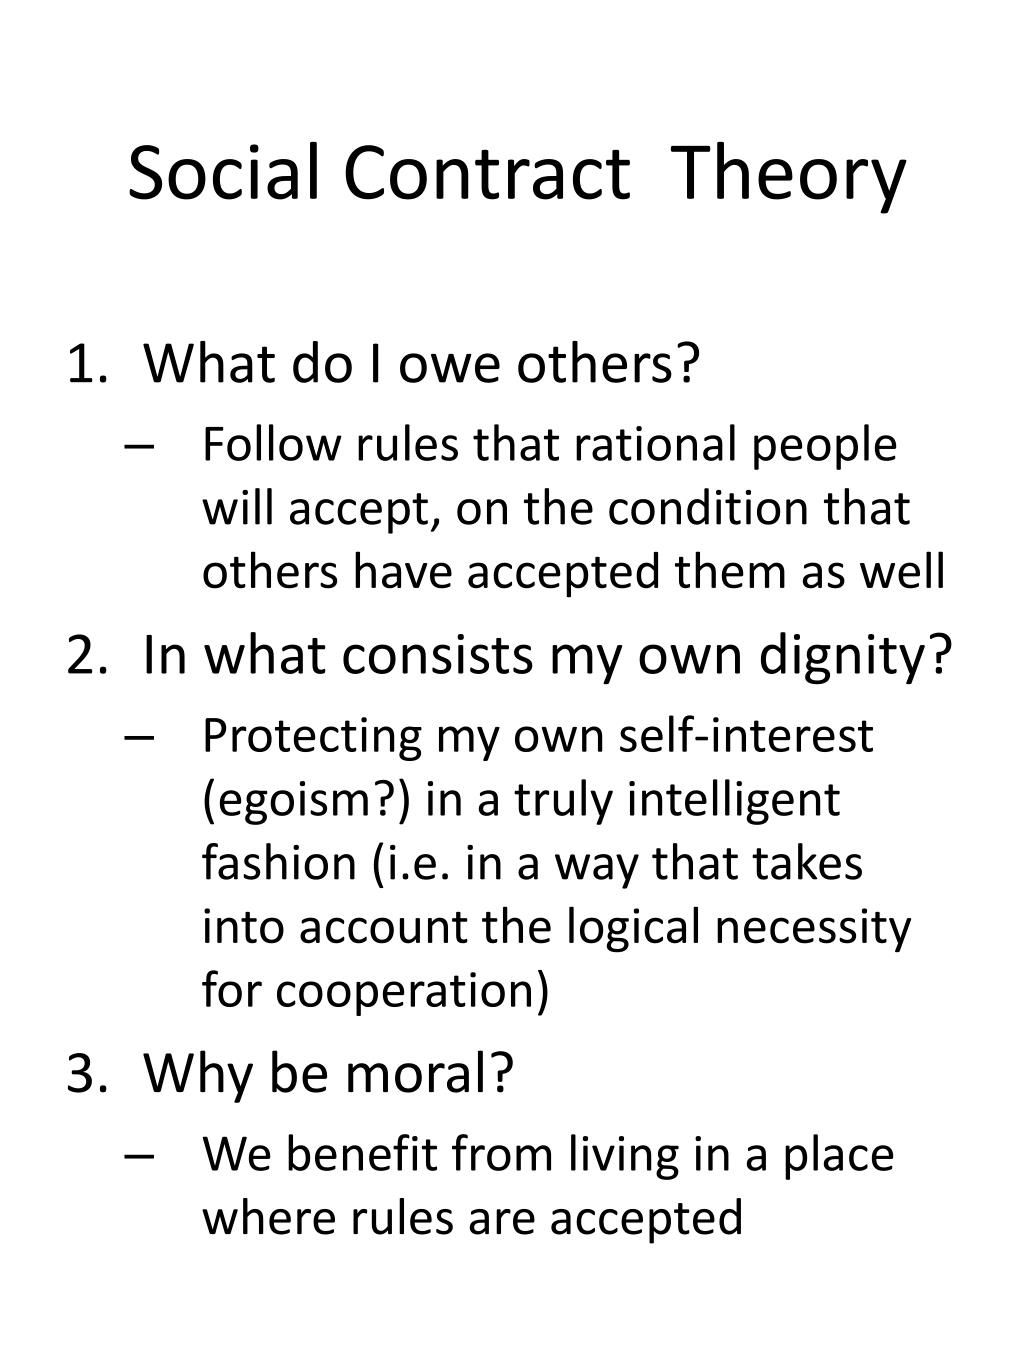 Conceptions of the Social Contract Theory